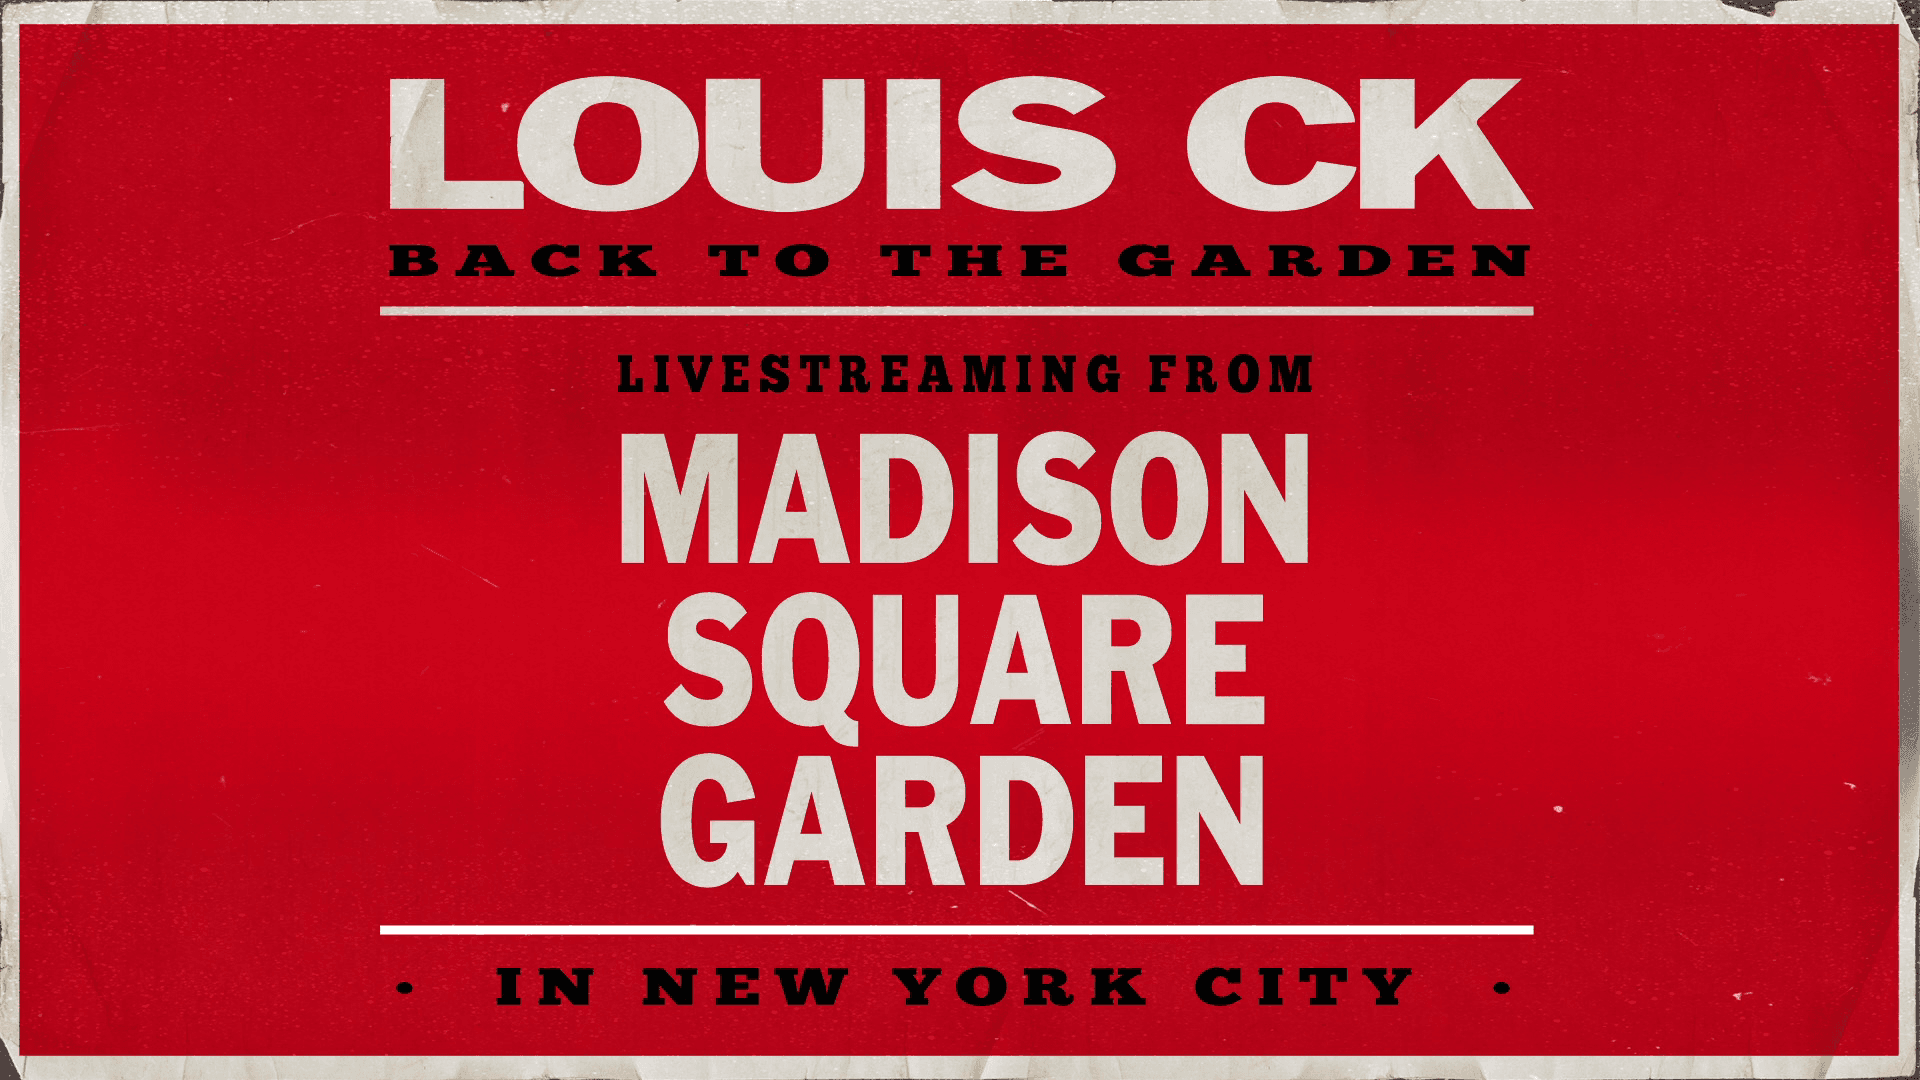 Louis C.K.: Back to the Garden